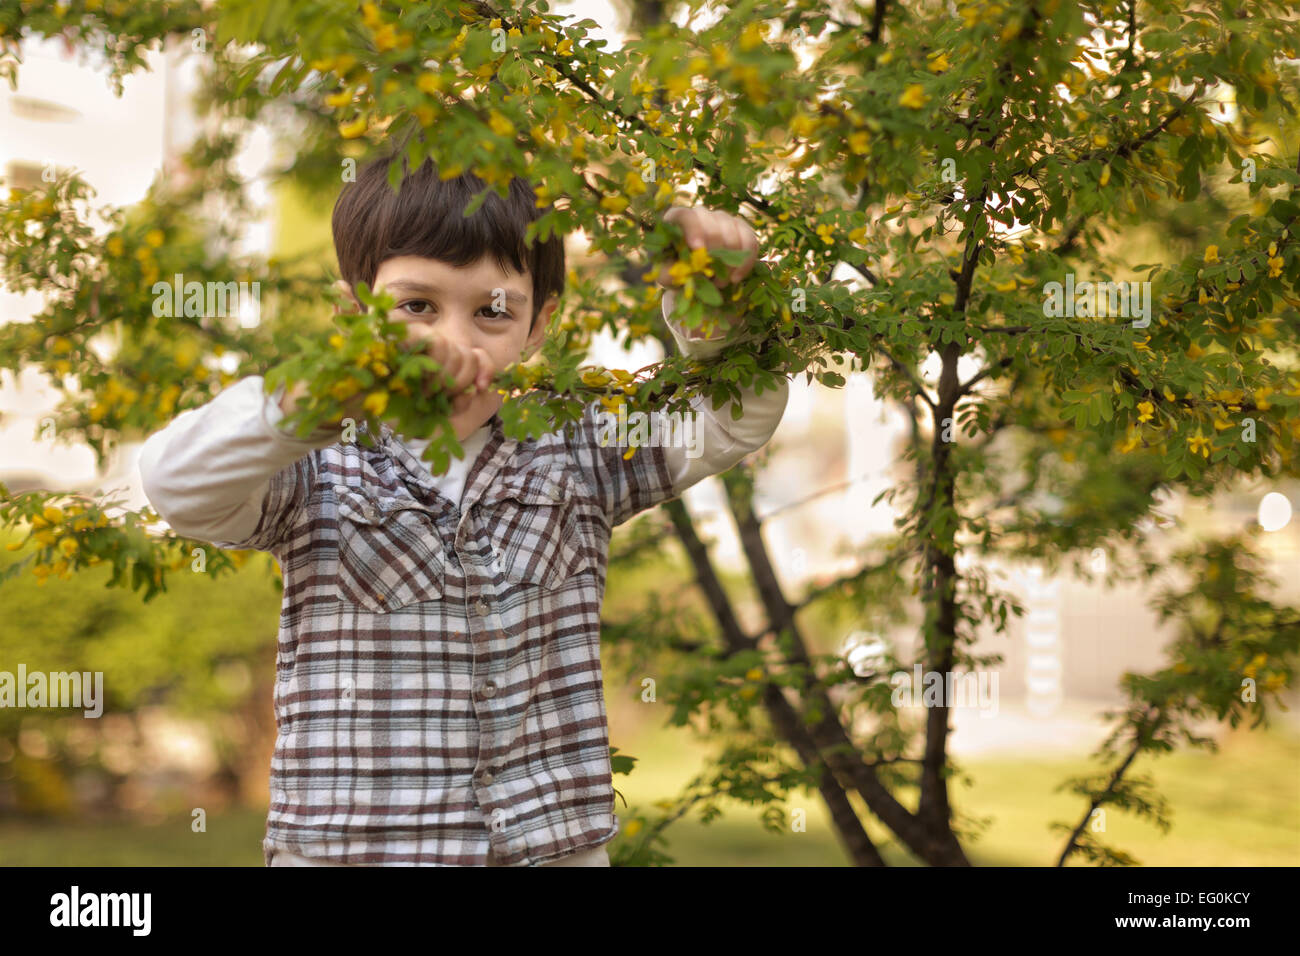 Young boy (4-5) hiding behind tree Stock Photo